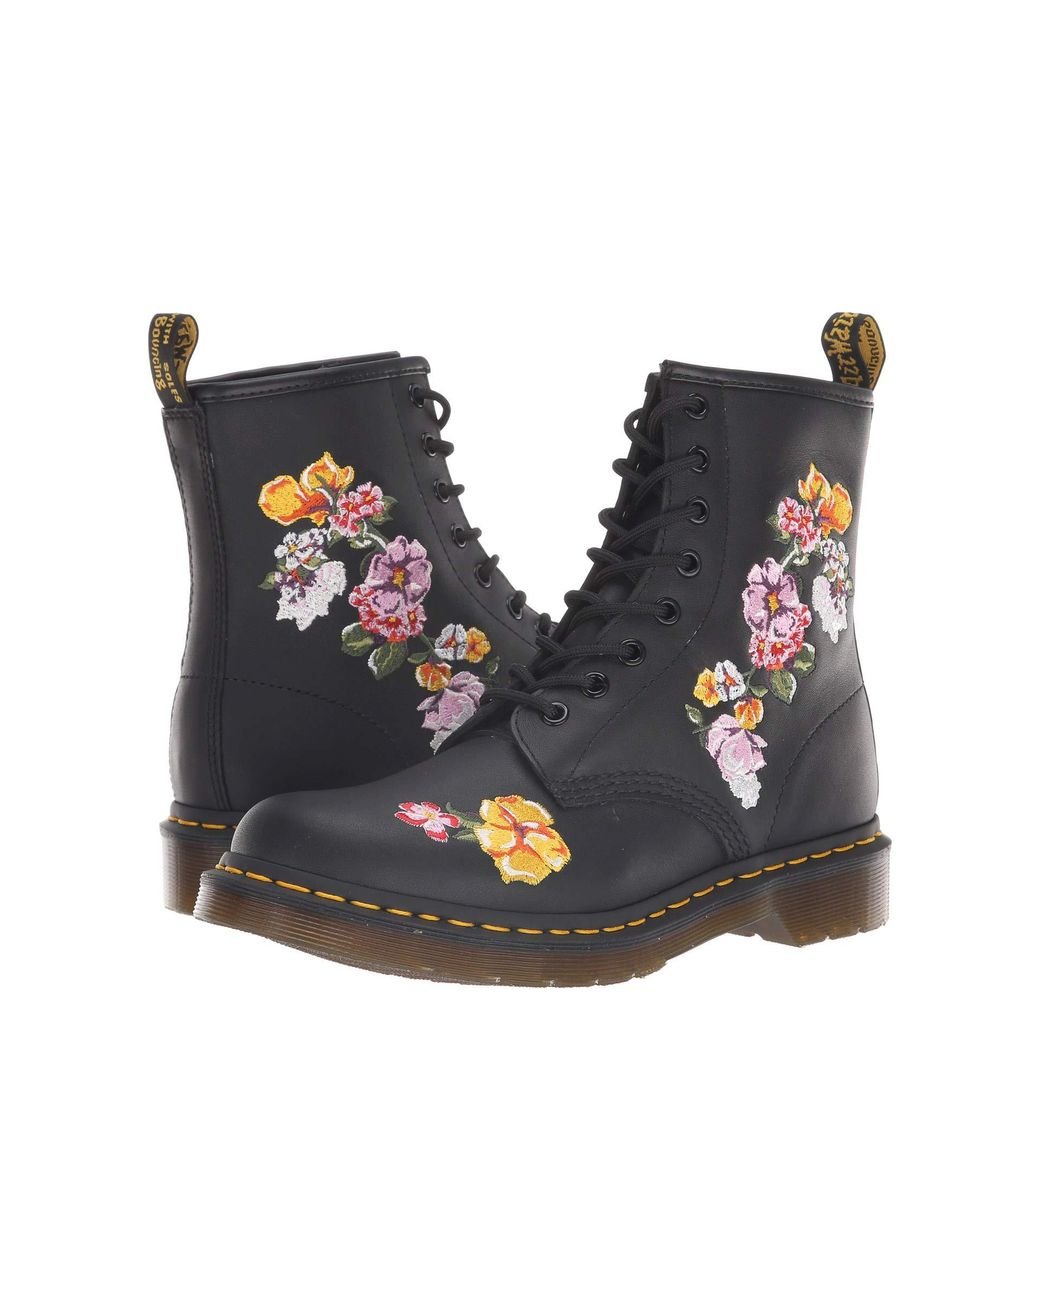 Dr. Martens 1460 Finda Ii Floral Embroidery Combat Boots in Black | Lyst